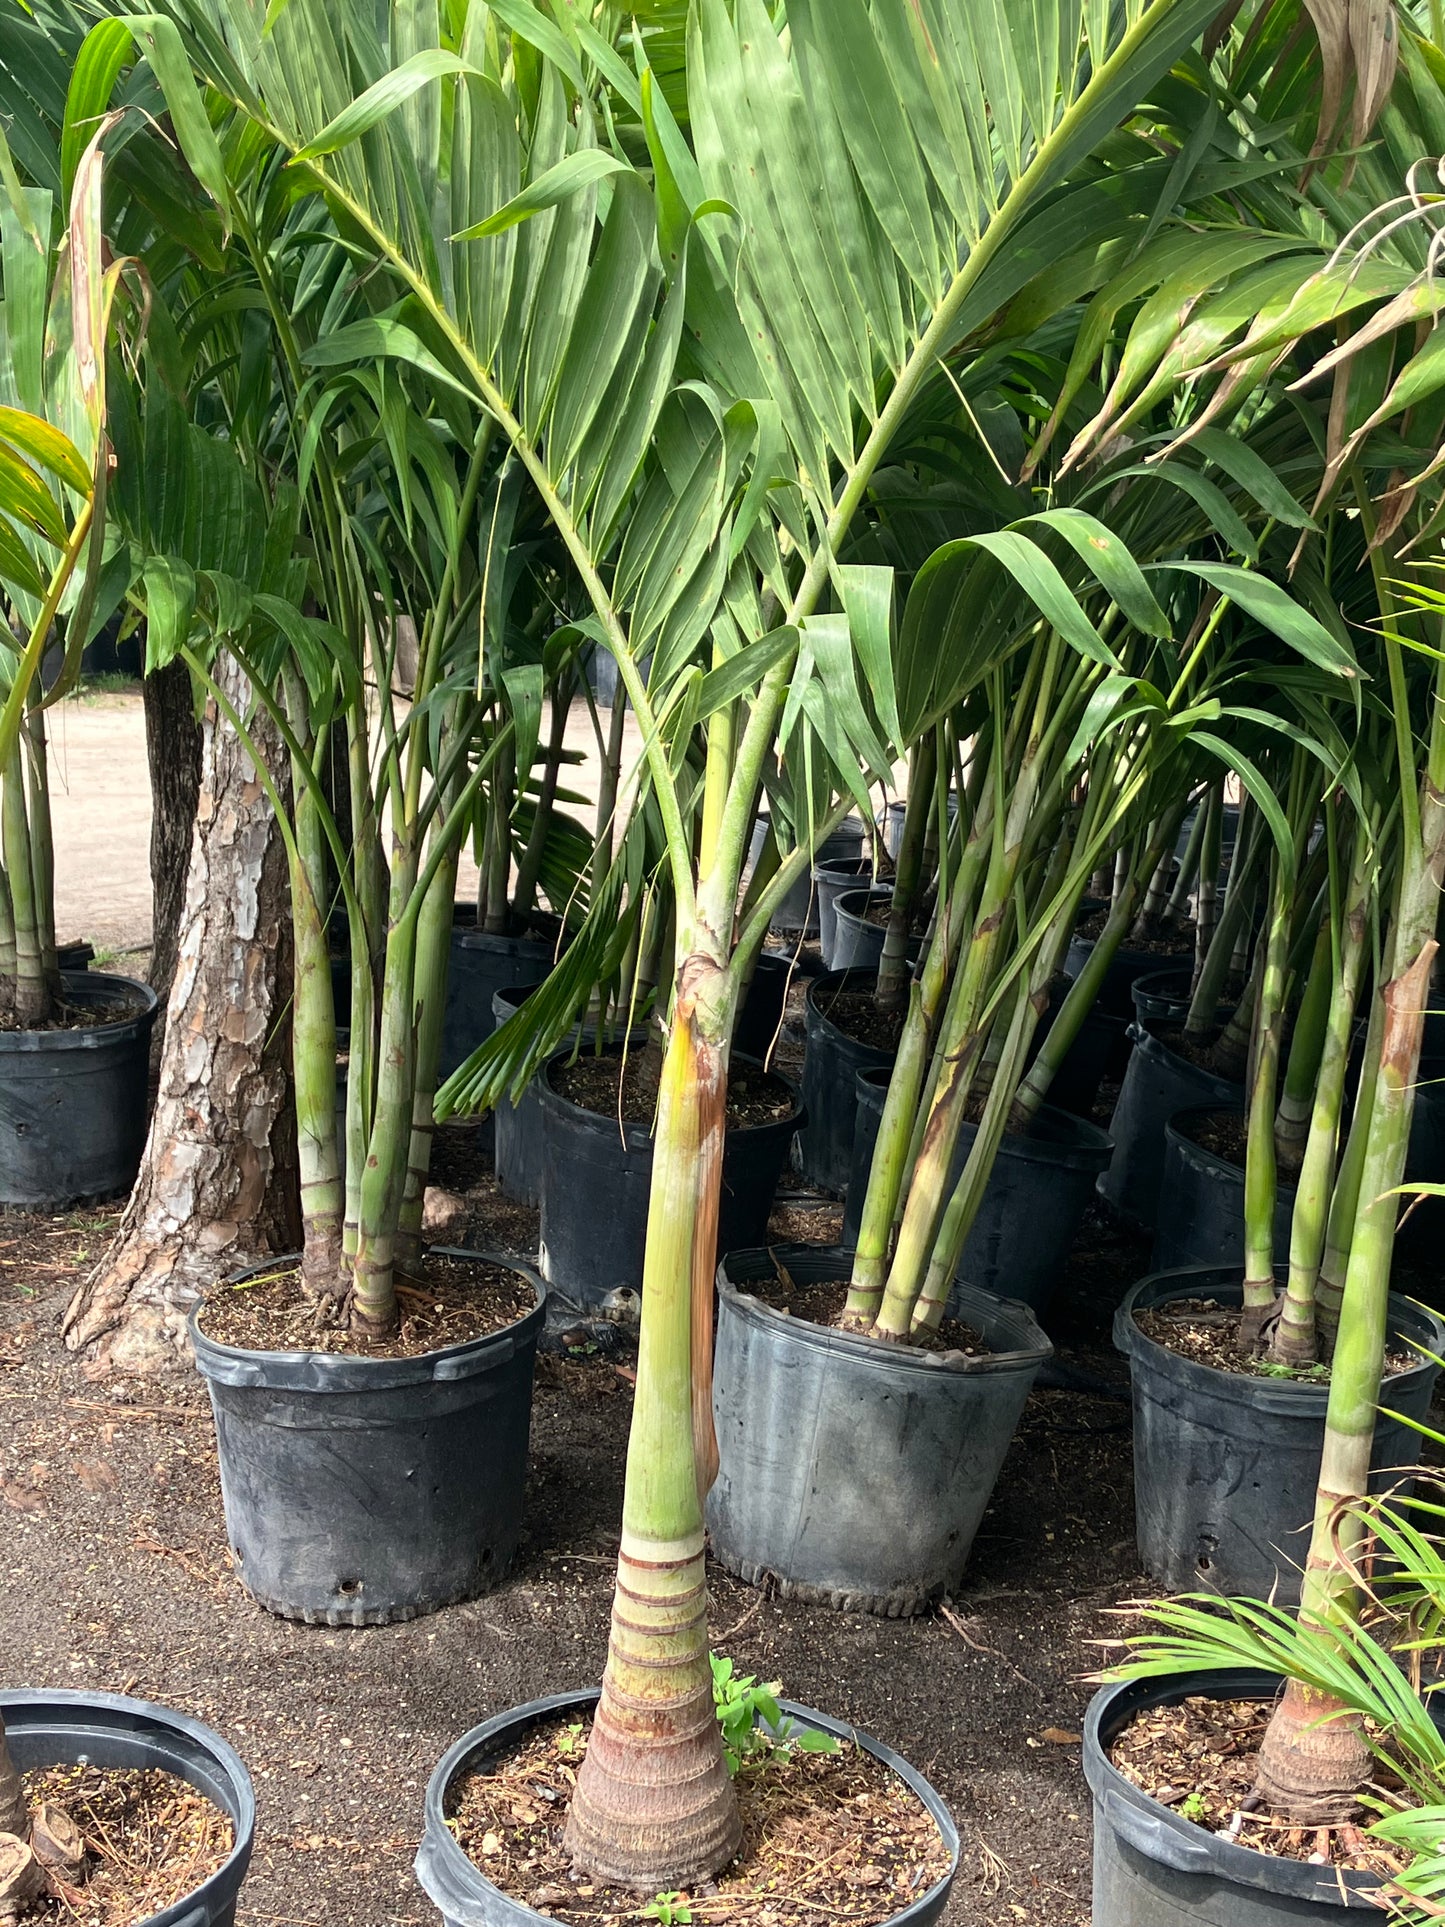 15 Gallon single, triple trunk Adonidia How to choose the correct size Adonidia or Christmas Palm Tree, height, width, and number of trunks are important to your landscaping project